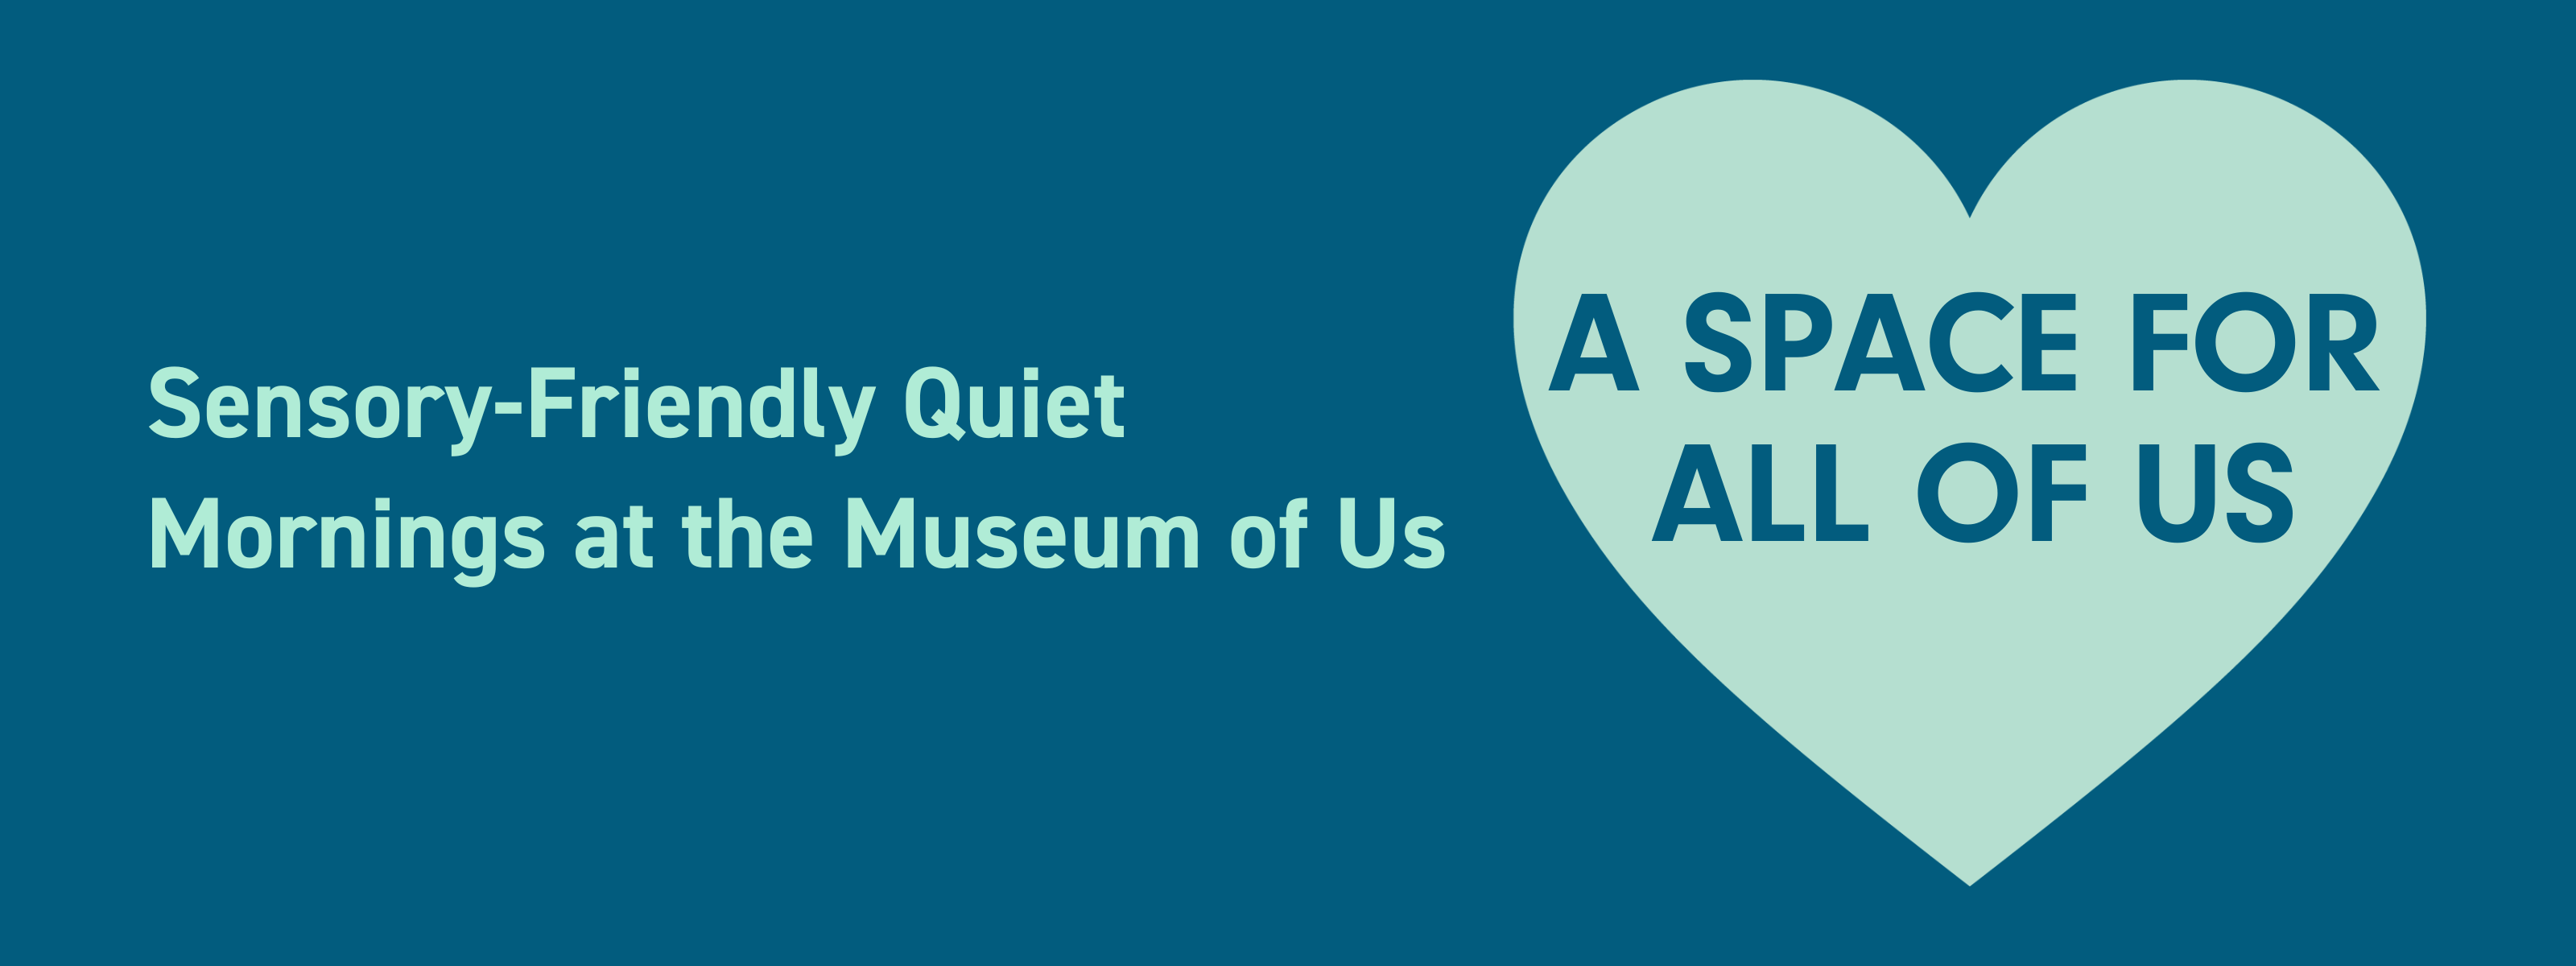 Dark blue graphic with light green heart icon, and text within the heart reading "A Space for All of Us Sensory-Friendly Quiet Mornings at the Museum of Us"